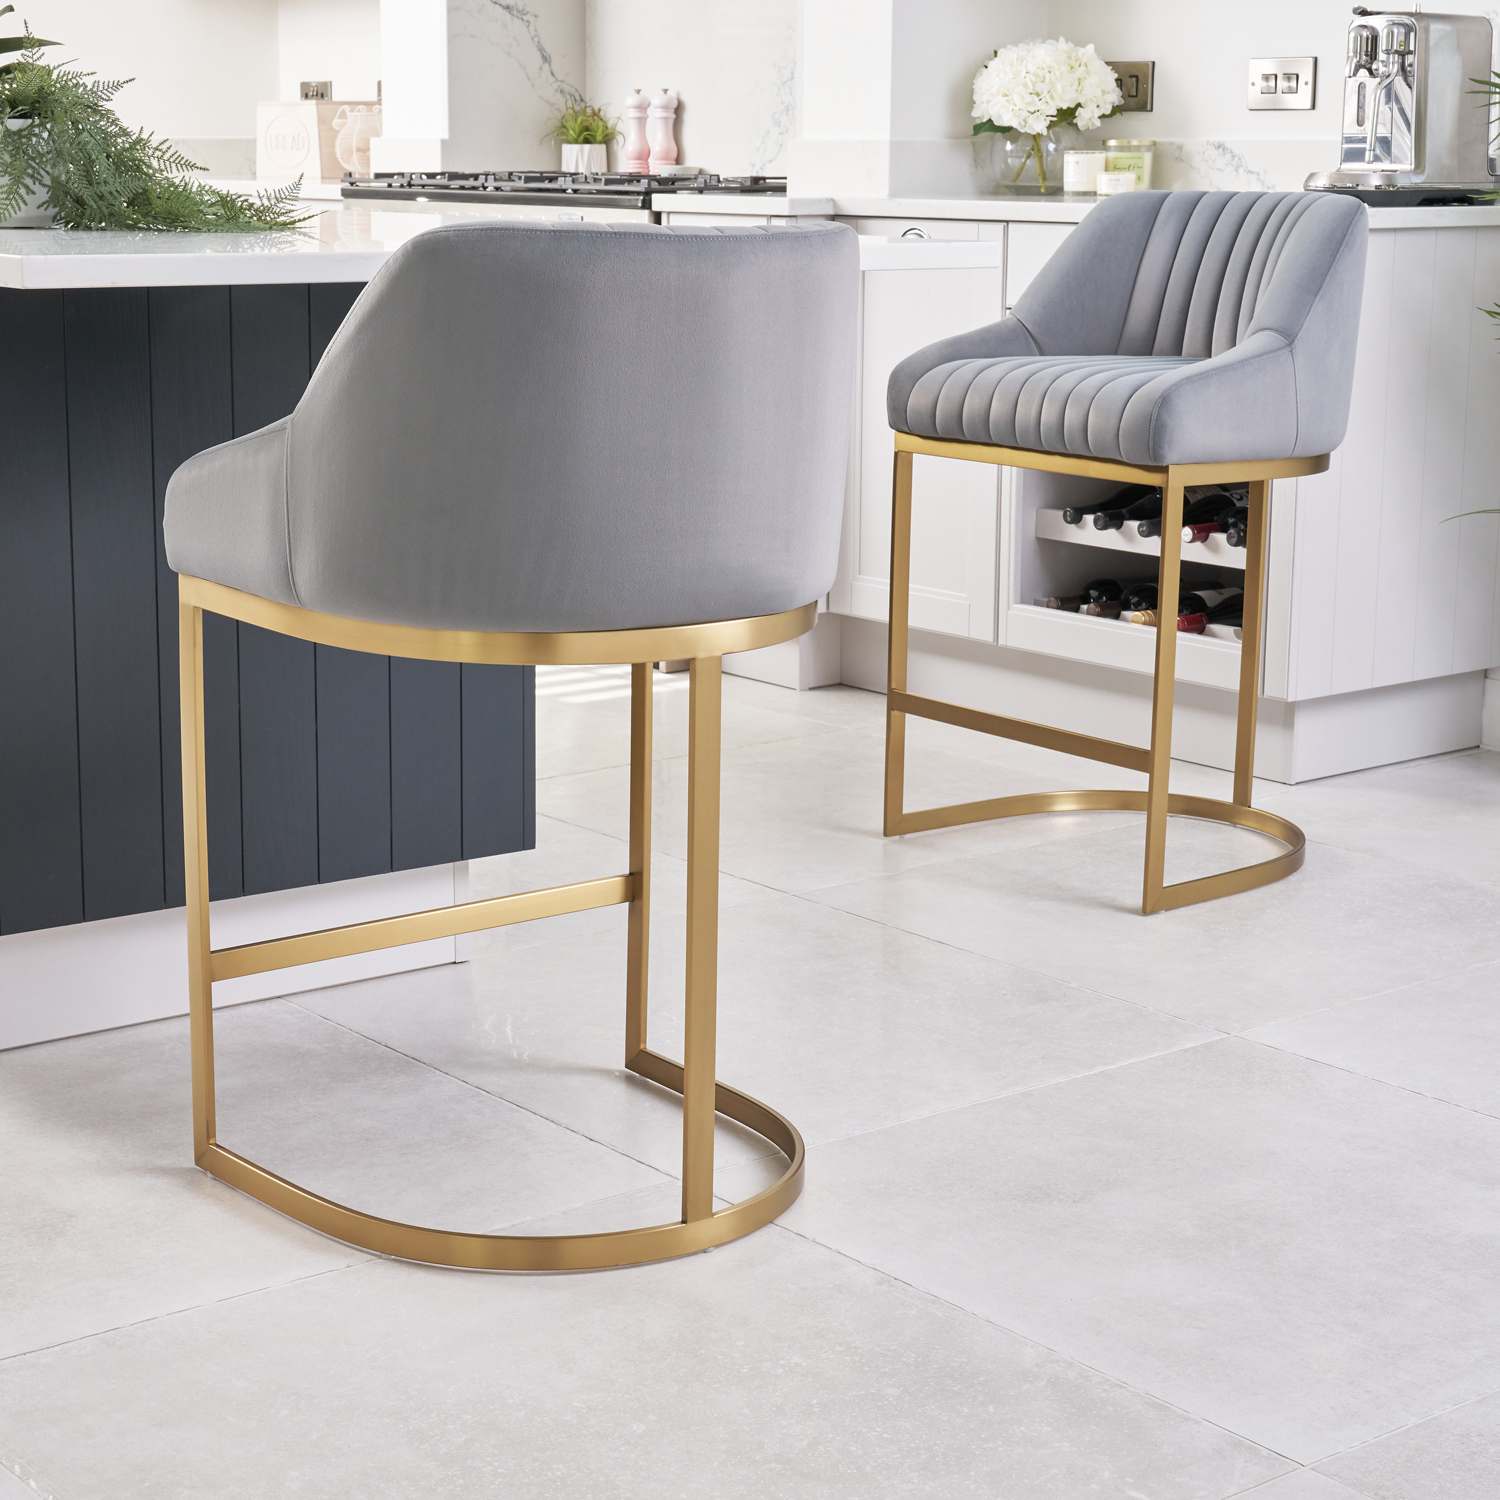 Barcelona Grey Velvet Kitchen Counter Stool with a Gold Stainless Steel Frame